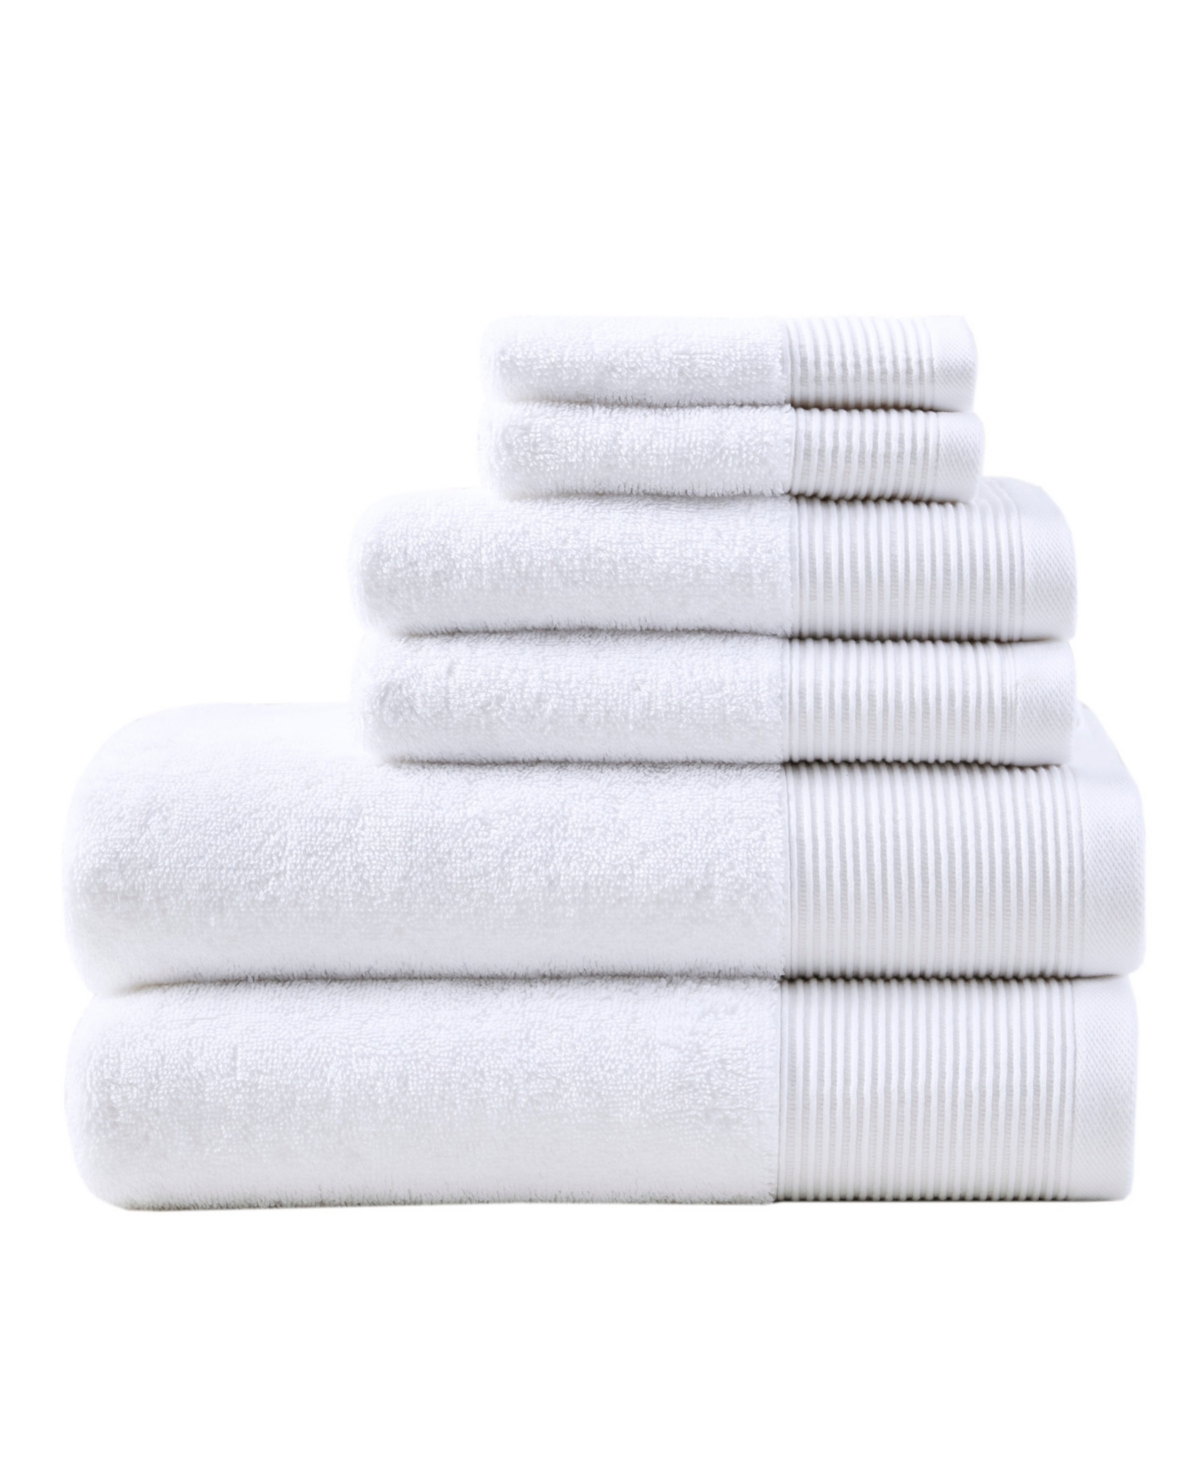 Beautyrest Nuage Cotton Tencel Blend Antimicrobial 6 Piece Towel Set Bedding In White